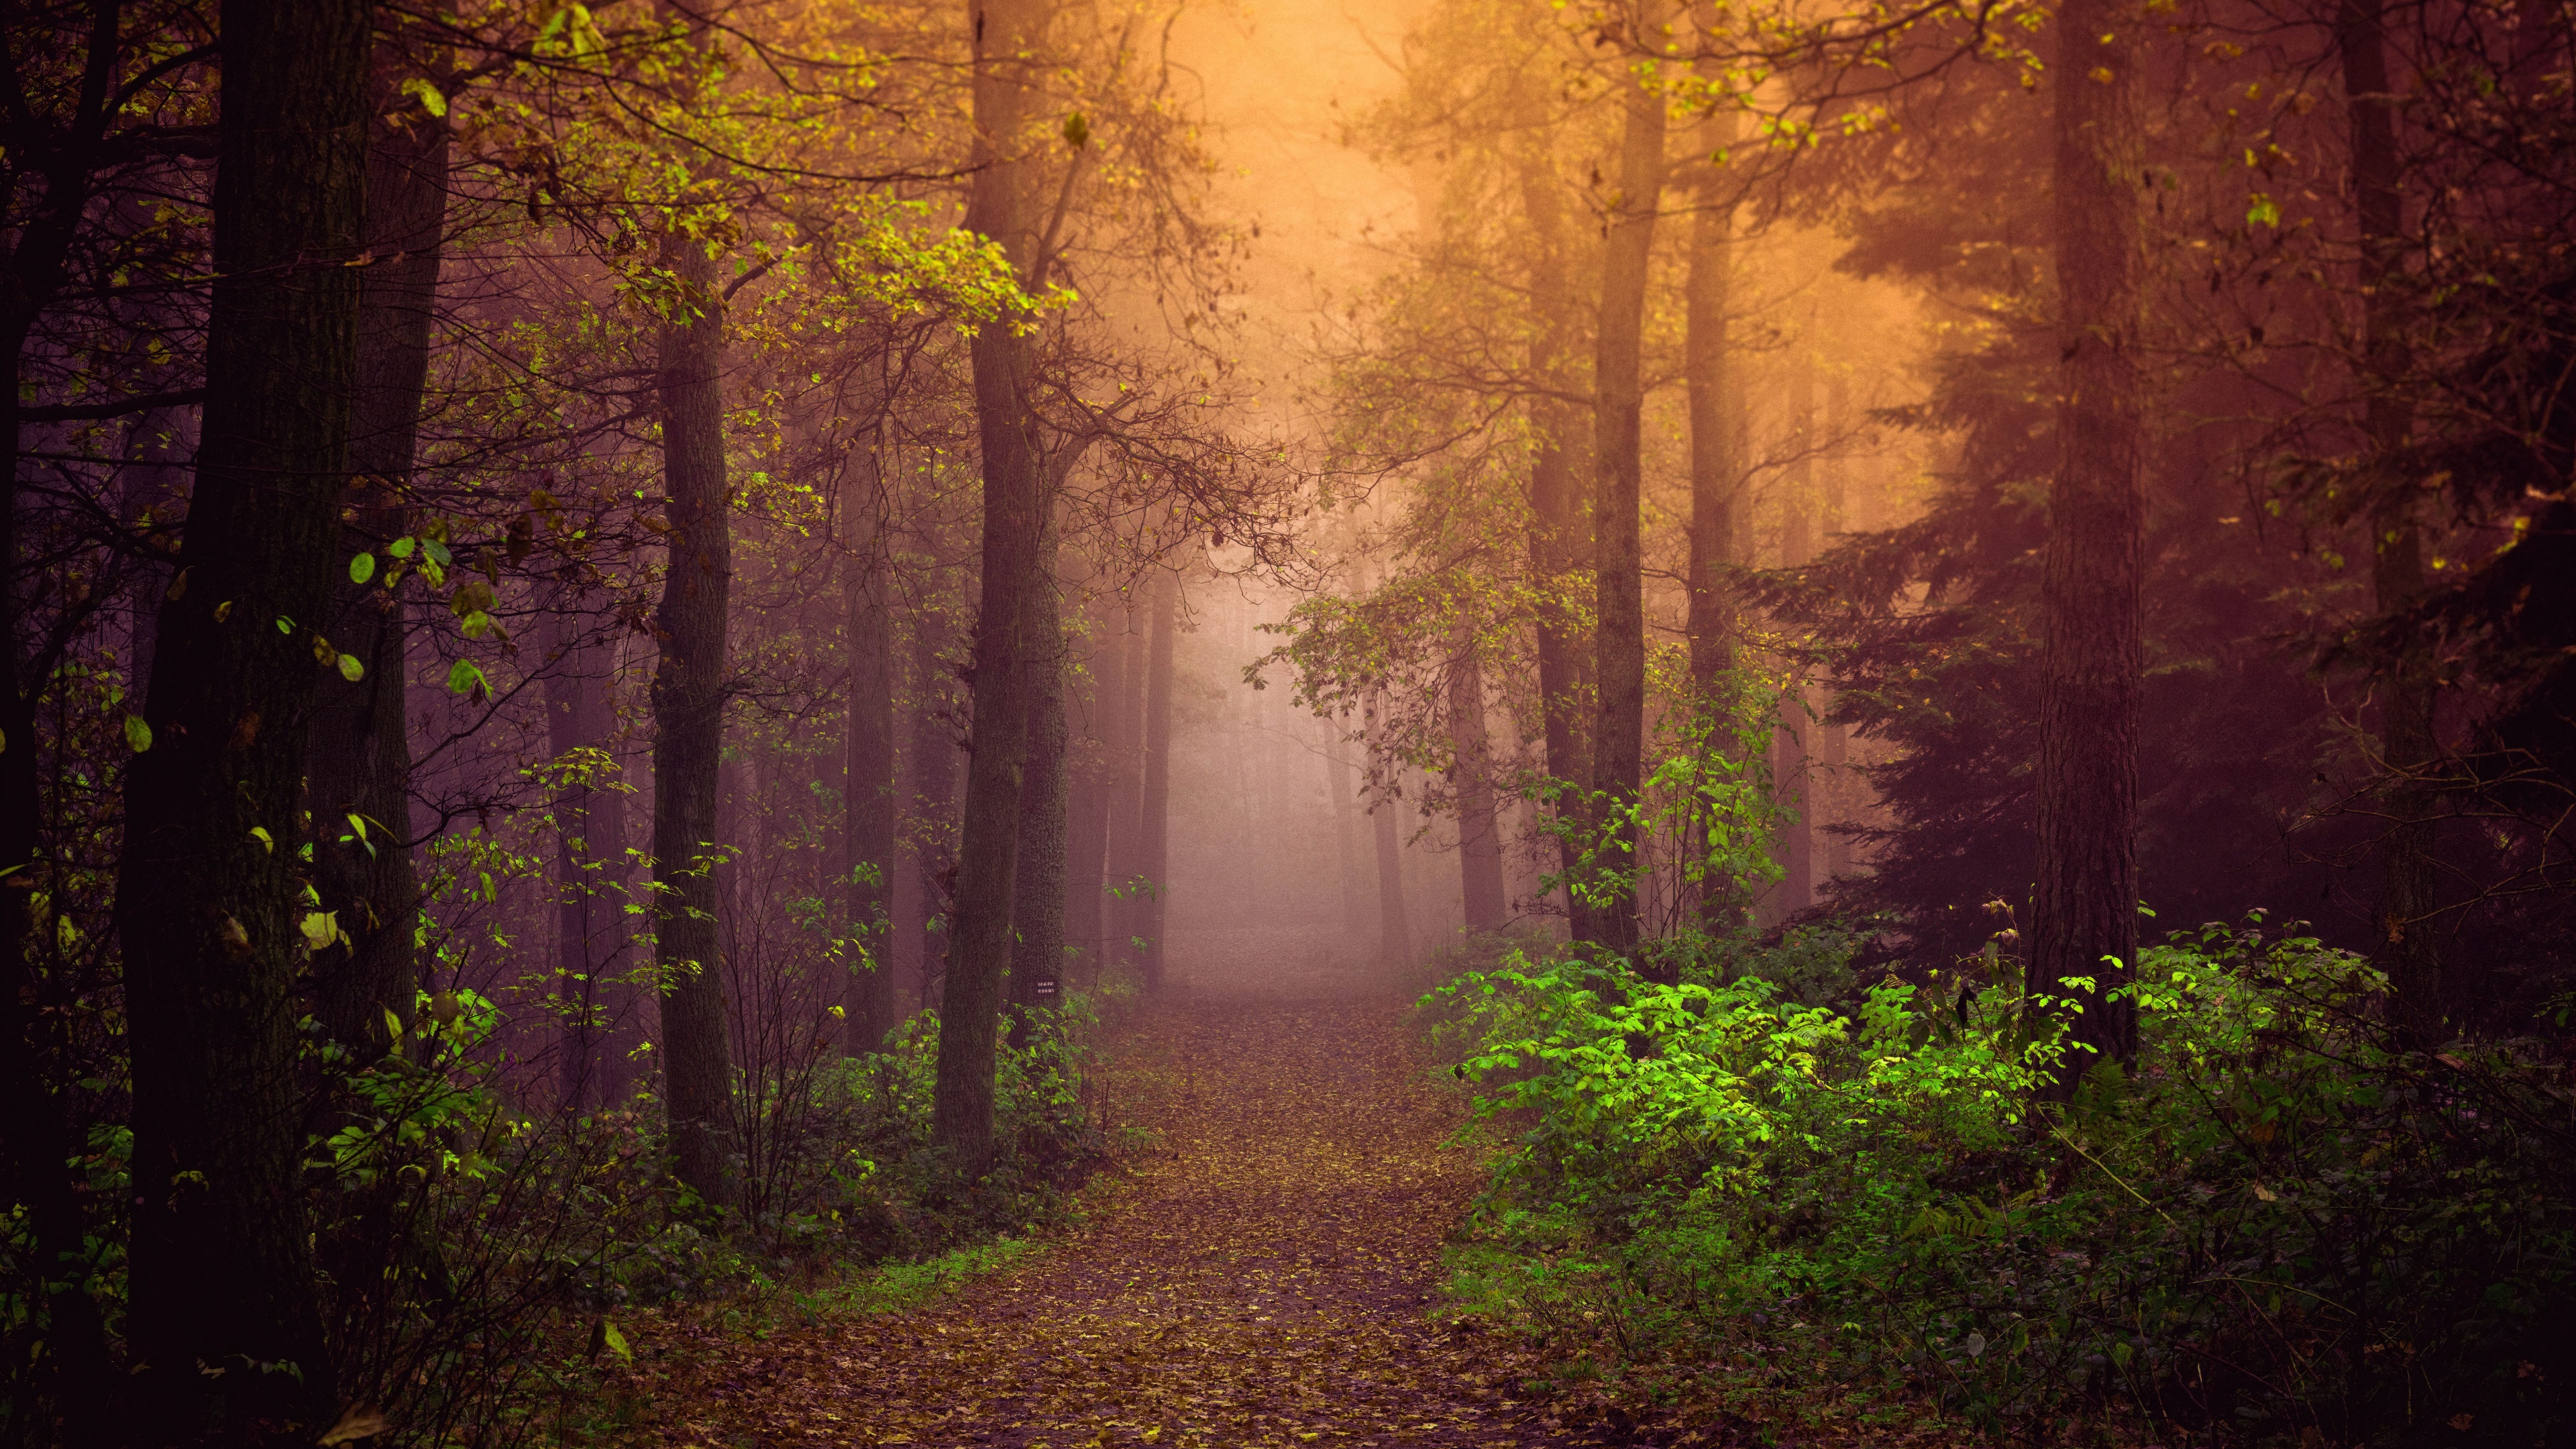 Wallpaper ID 209901  a leaf covered path through a foggy forest autumn  in a misty forest 4k wallpaper free download